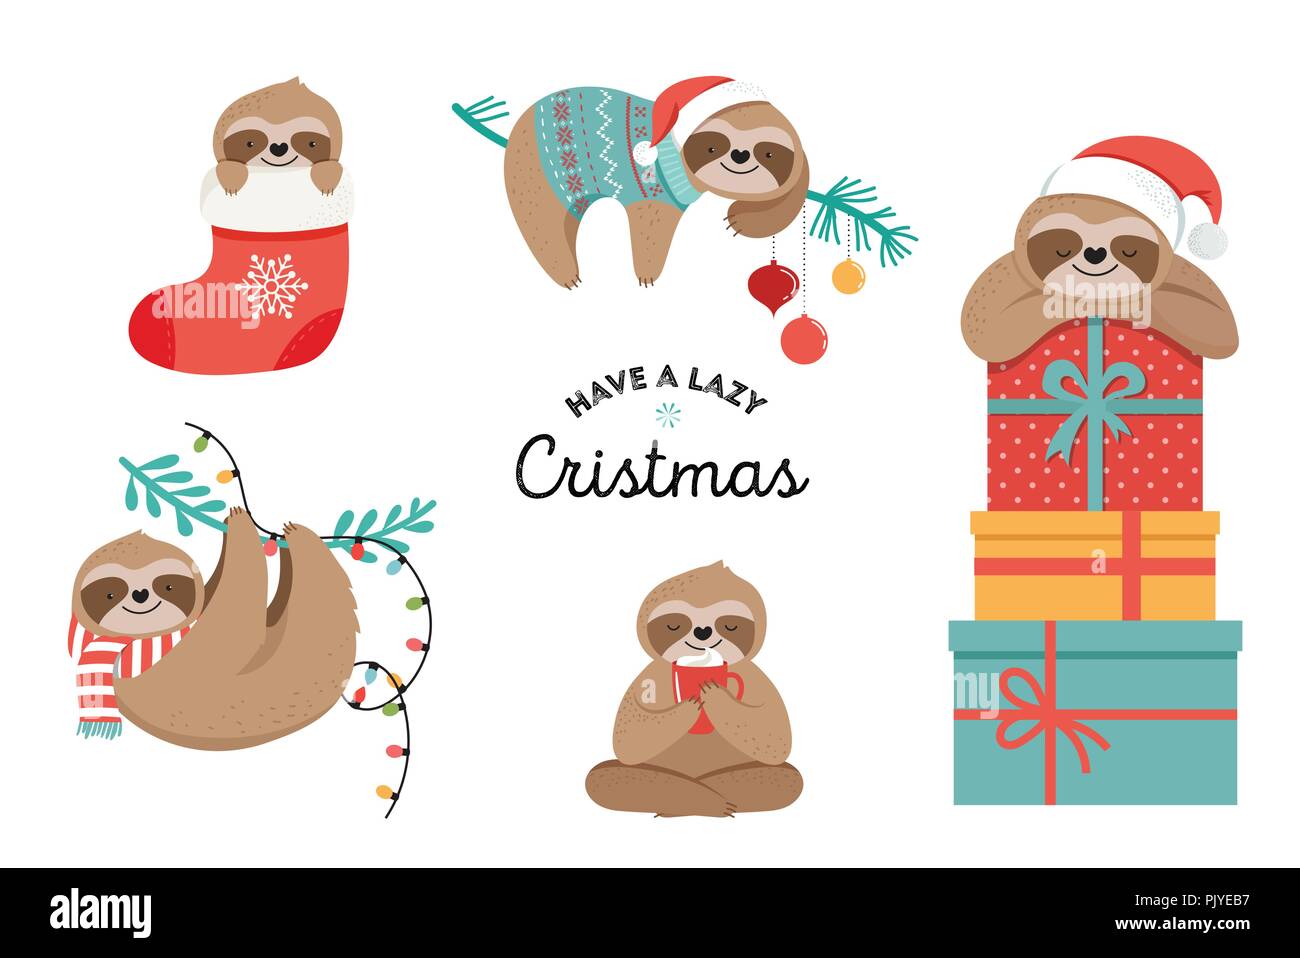 Cute sloths, funny Christmas illustrations with Santa Claus costumes, hat and scarfs, greeting cards set, banner Stock Vector